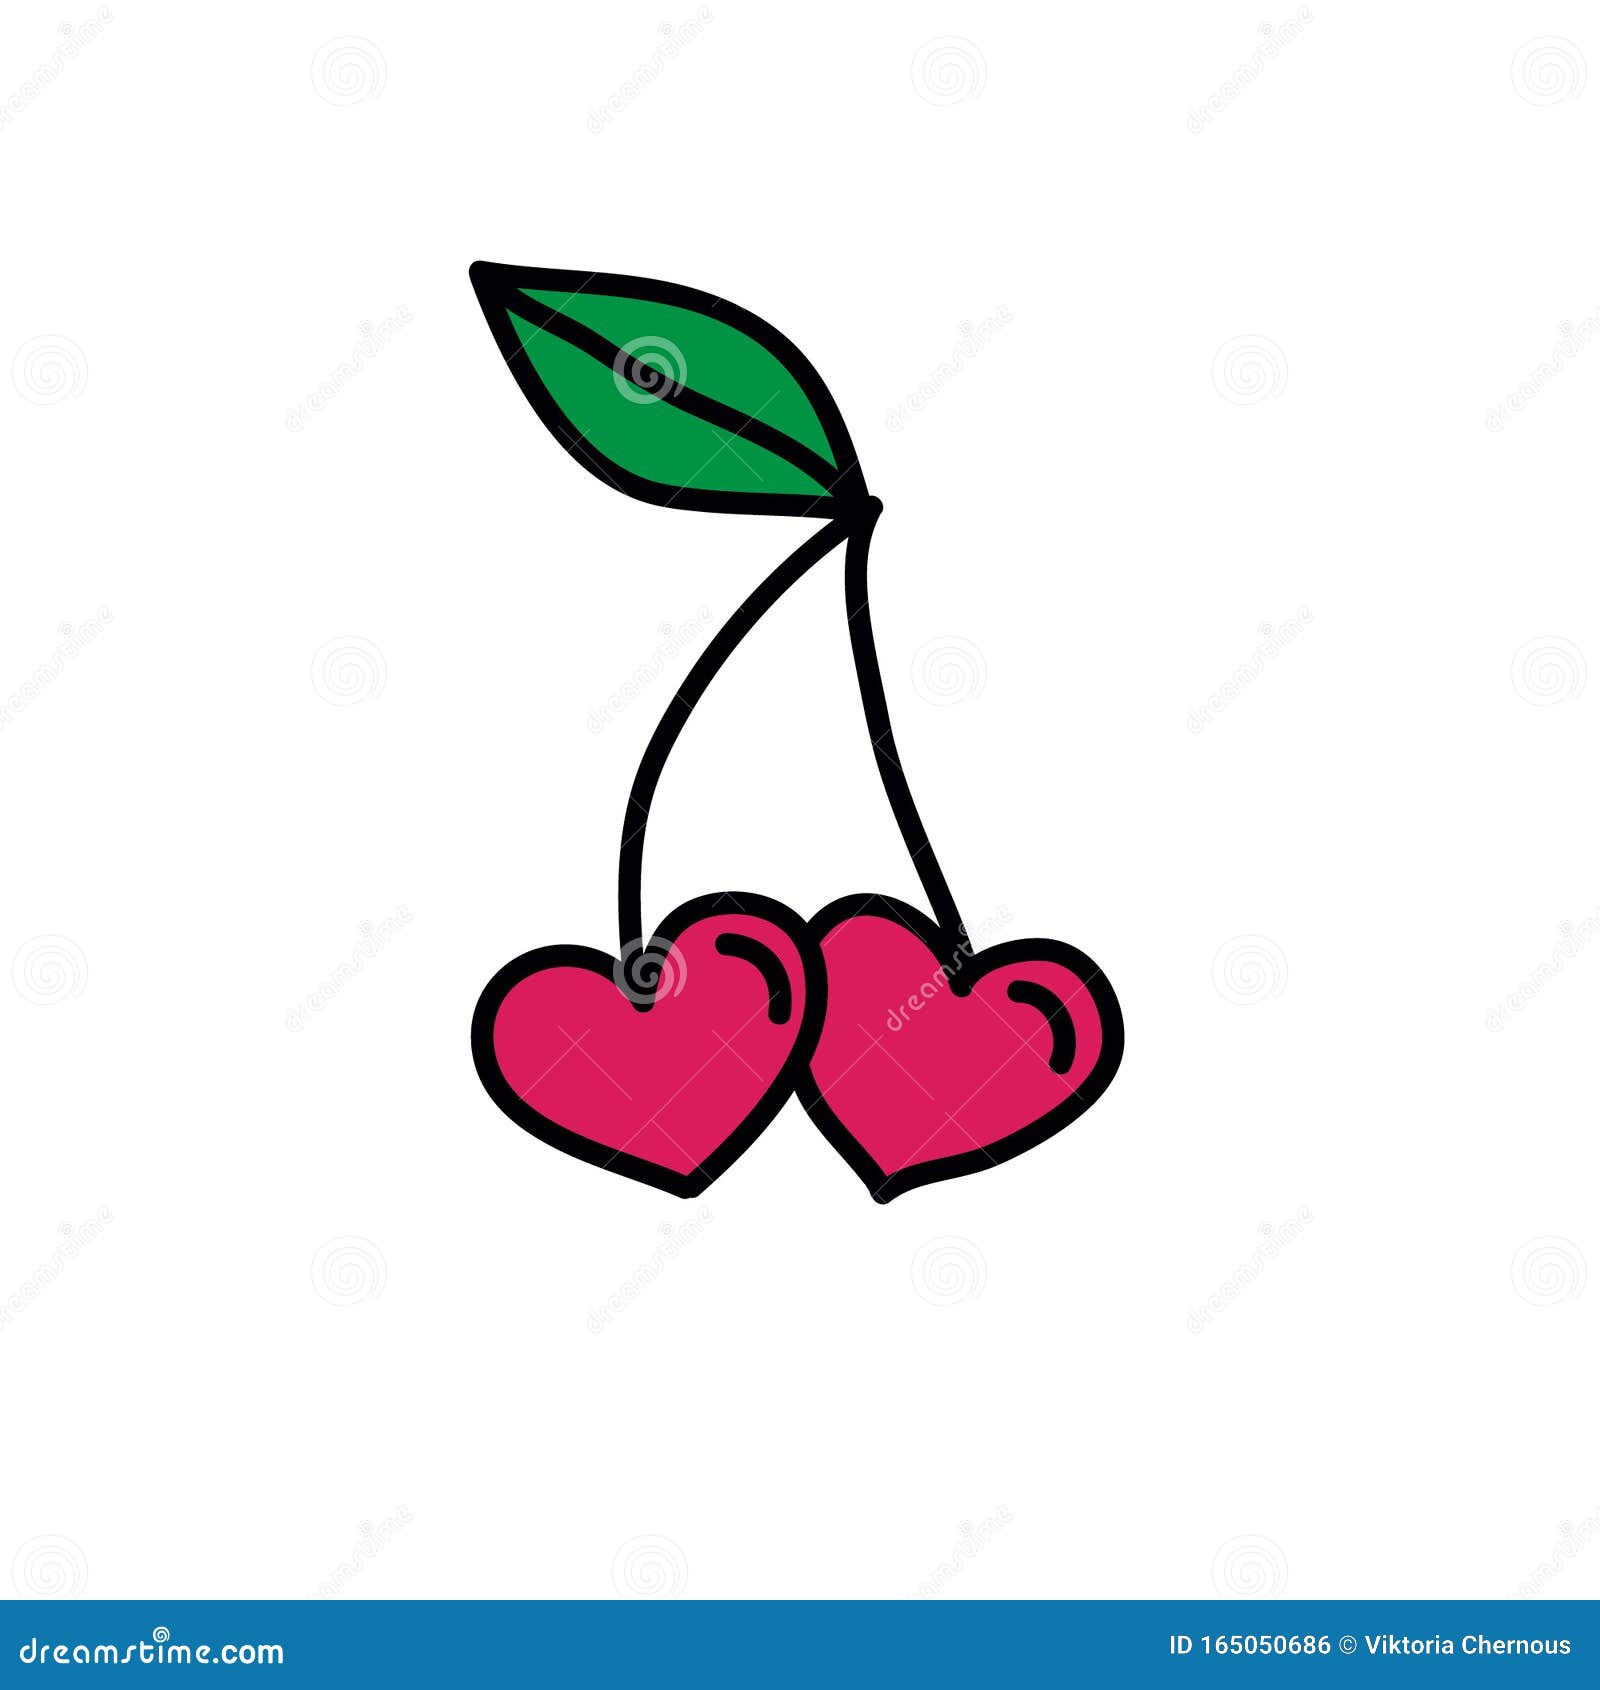 https://thumbs.dreamstime.com/z/cherry-hearts-doodle-icon-vector-illustration-color-165050686.jpg